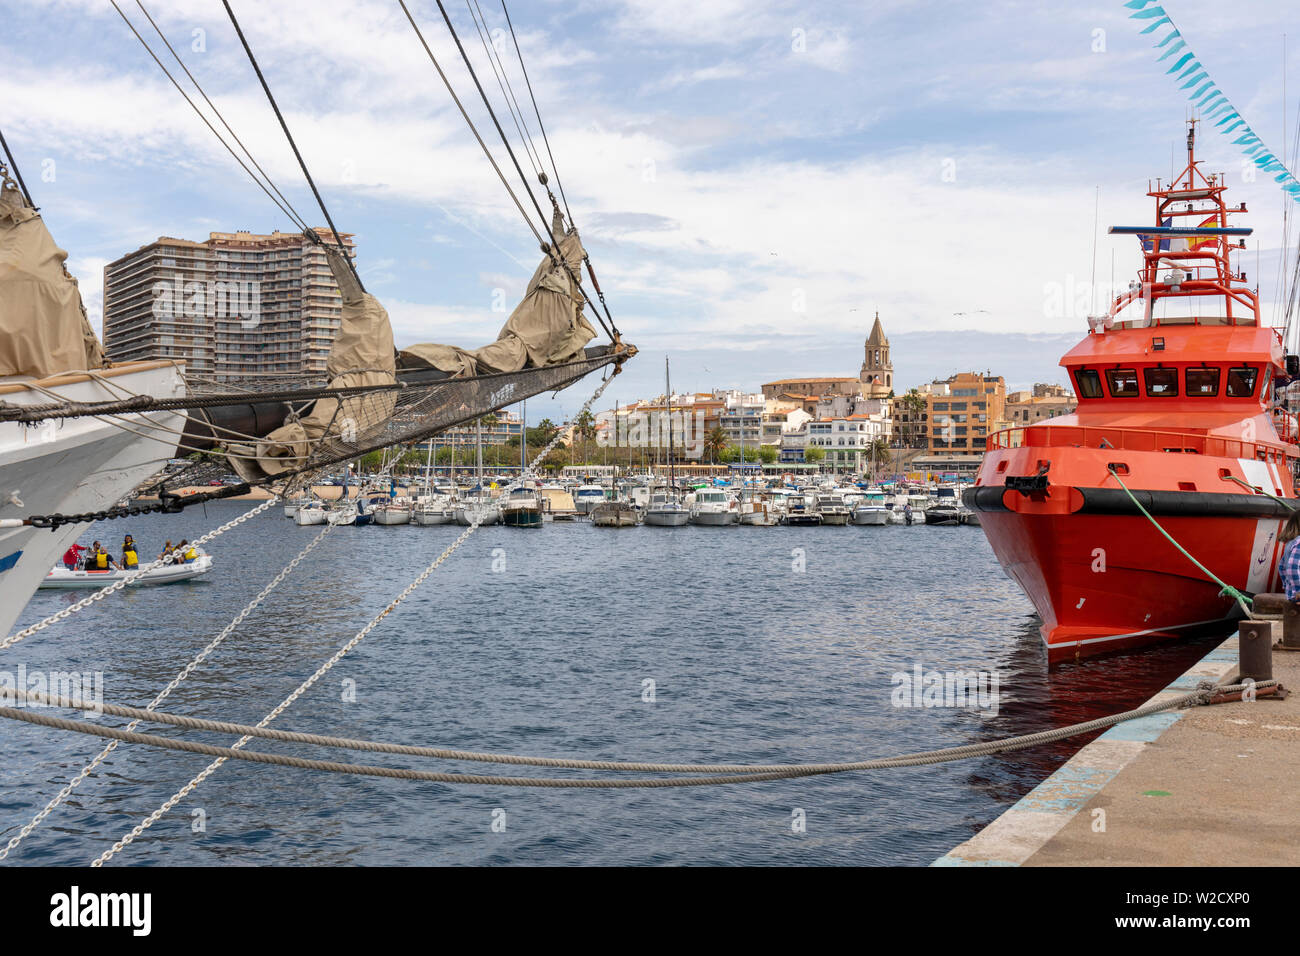 Marine Festival at Palamos  Harbour, Costa Brava, Spain, with a sailing ship bowsprit and deep sea rescue vessel in the foreground Stock Photo